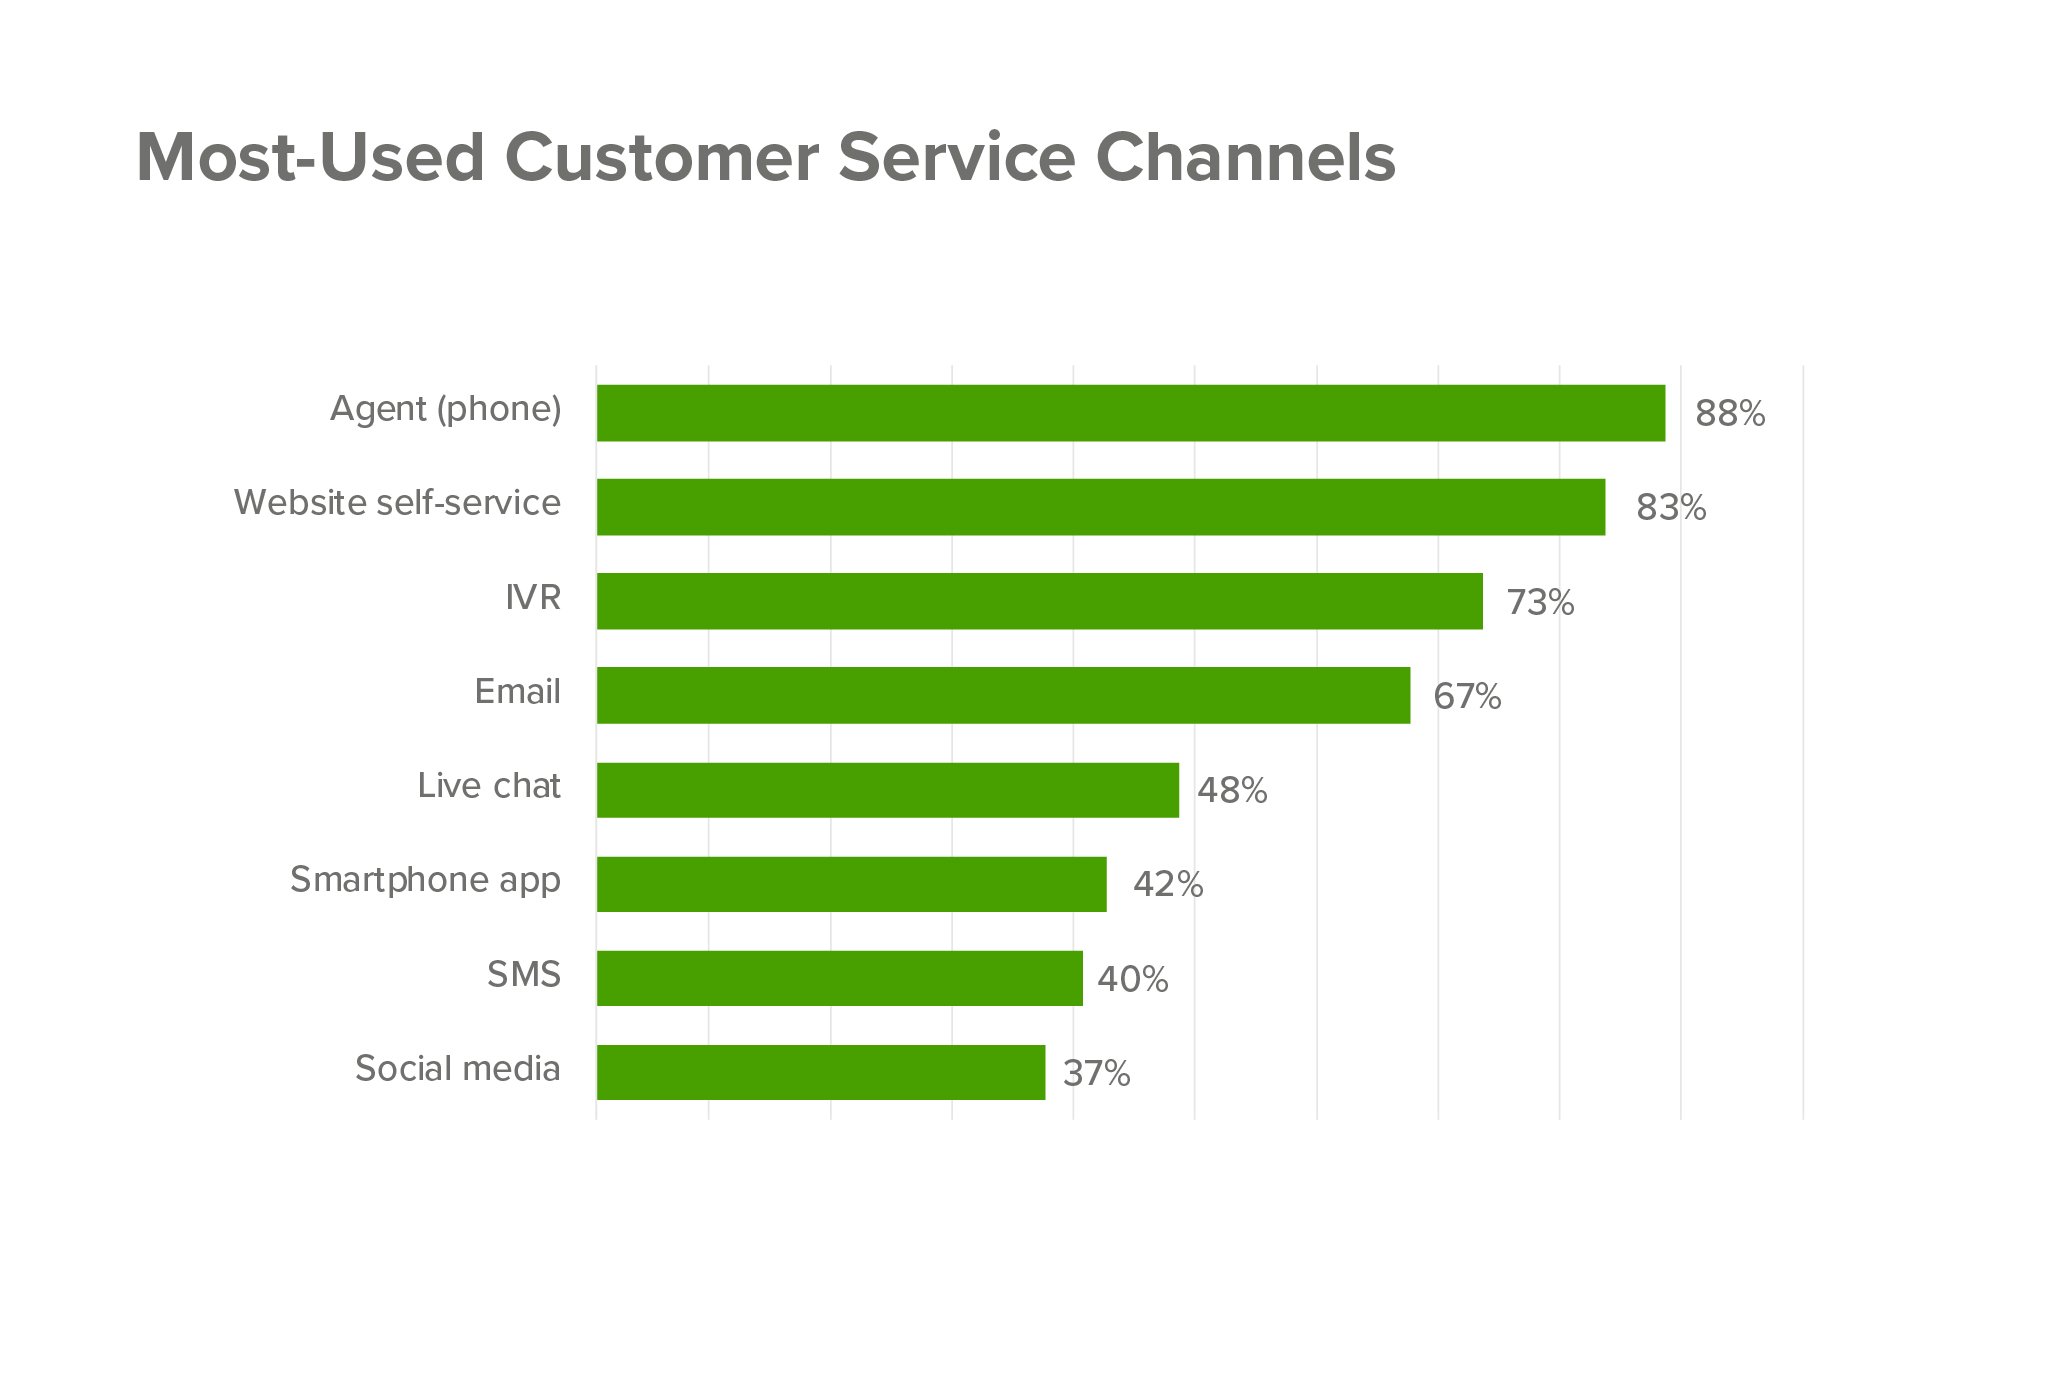 Most used customer service channels